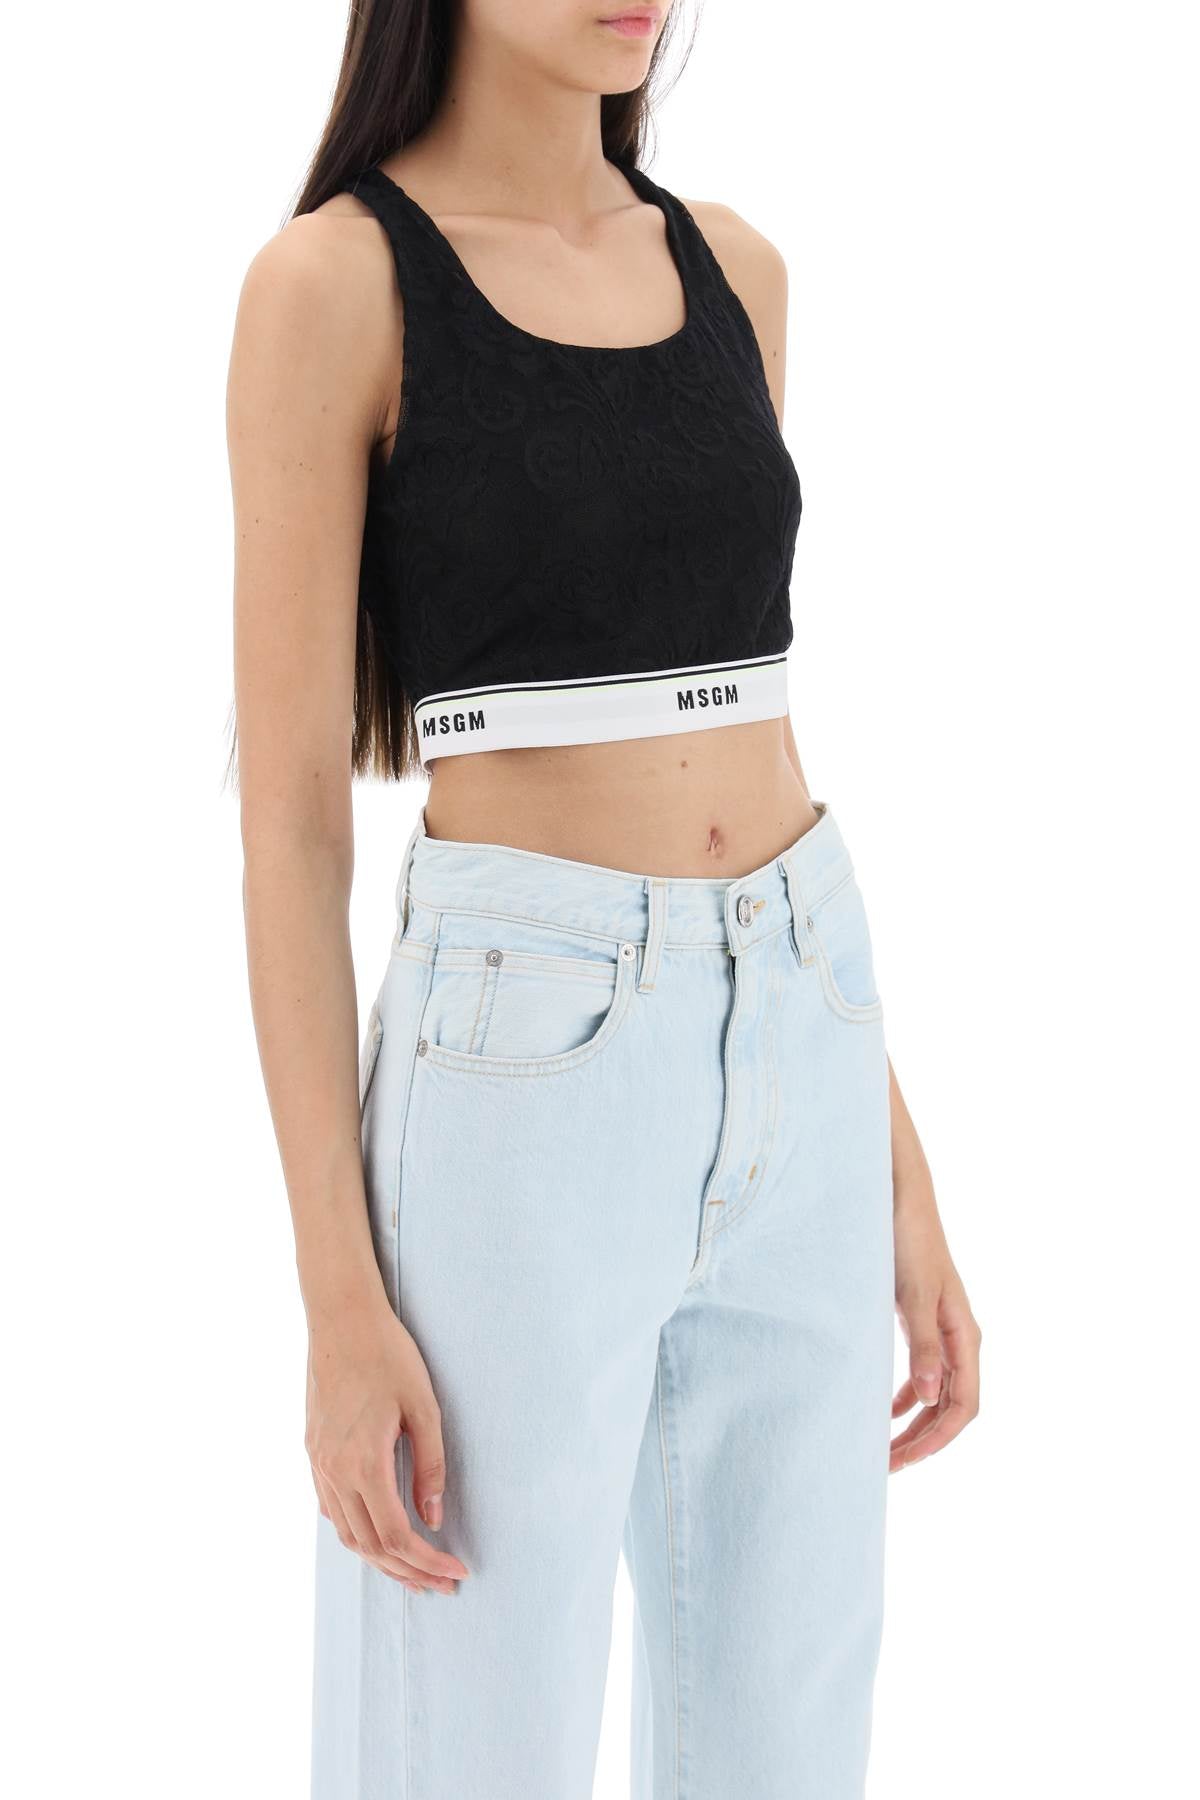 Msgm sports bra in lace with logoed band-1